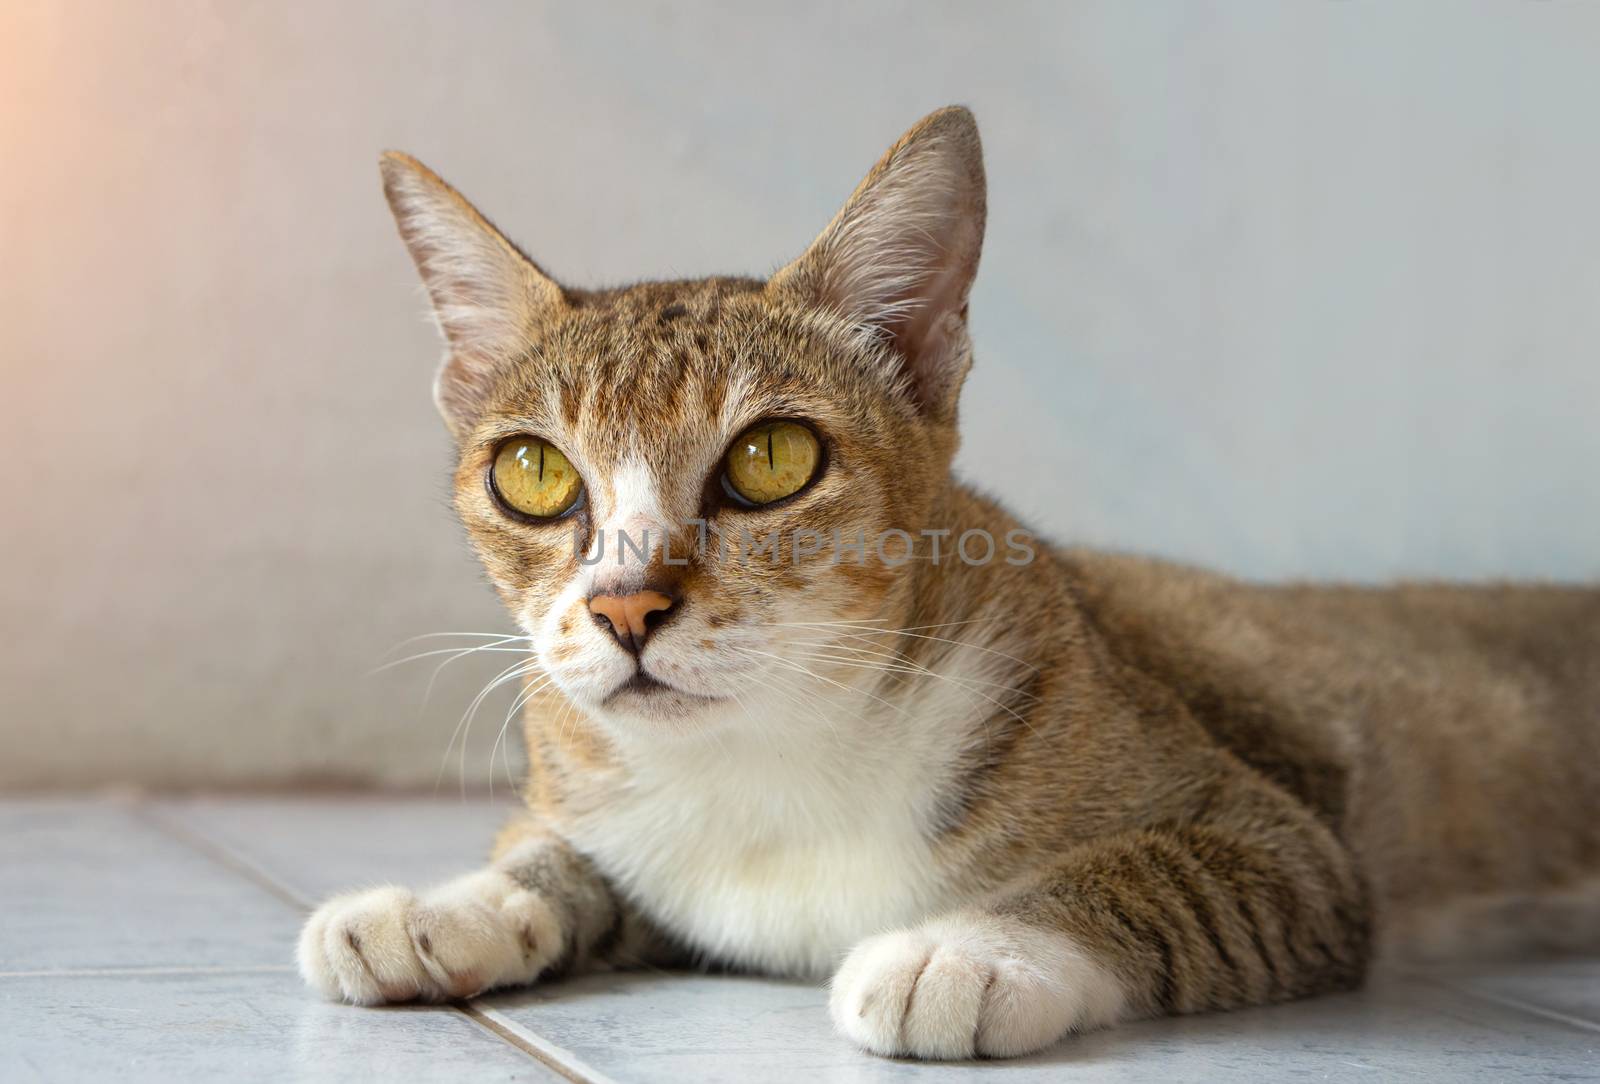 Old cat, real Thai breeds, sit in the house. Soft color tone.